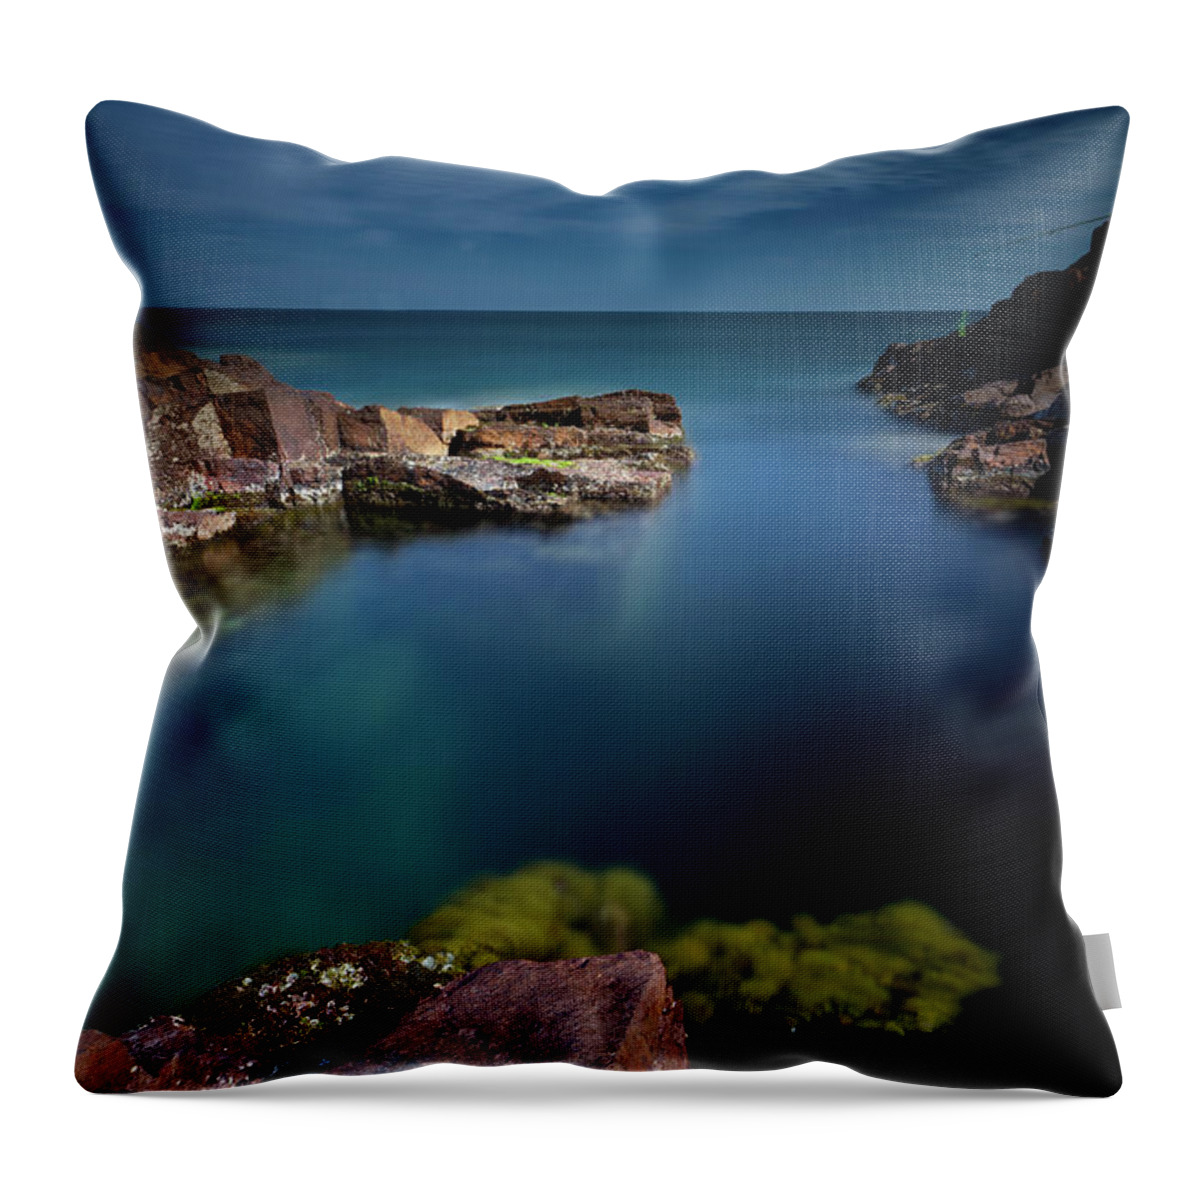 Scenics Throw Pillow featuring the photograph French Riviera Shoreline by Mako Photo